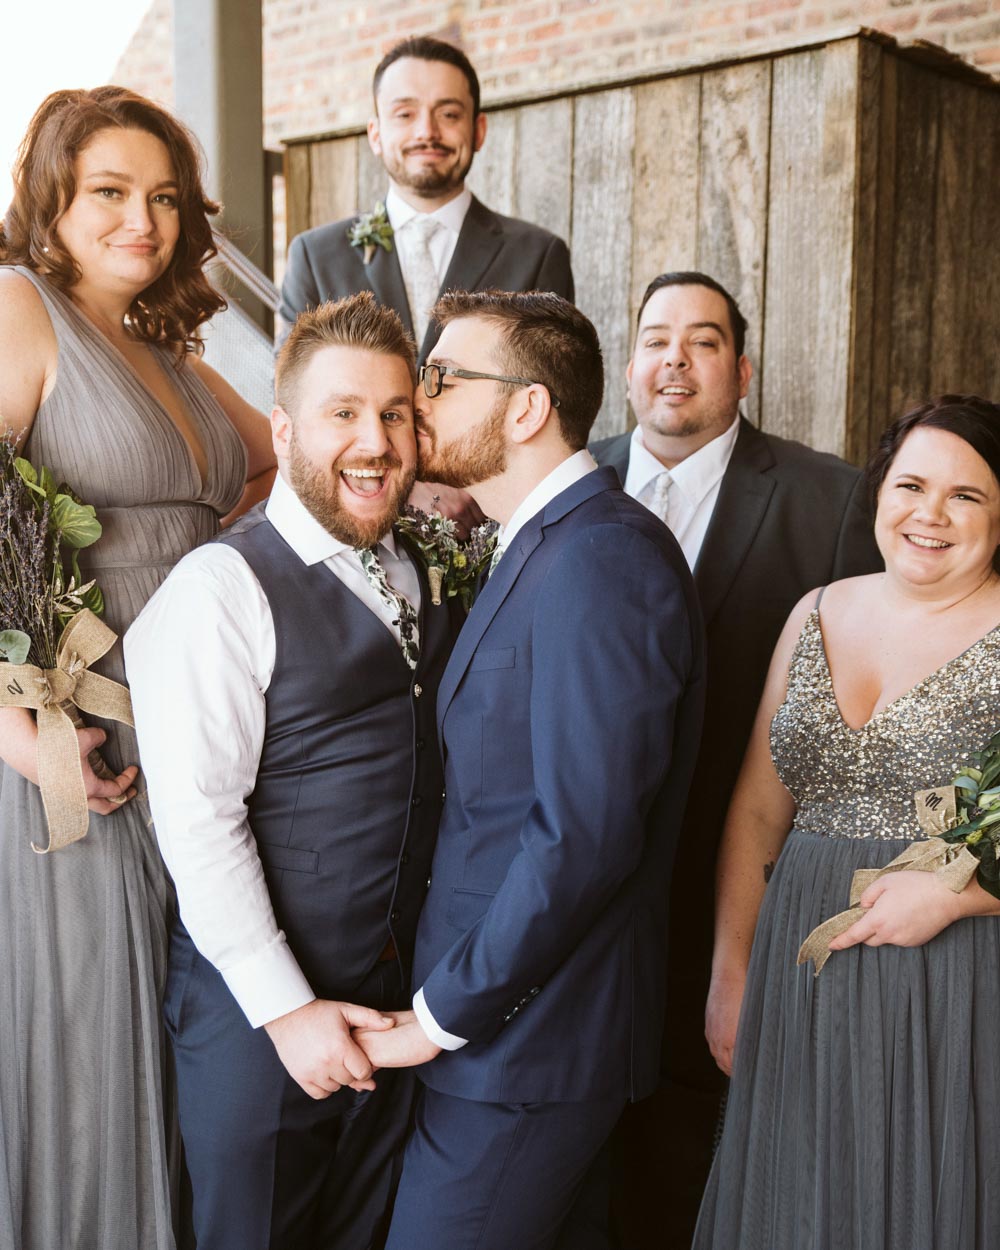 David + Andrew: Midwestern Pride Wedding Giveaway winners marry Photo Glass & Grain Photography published on Equally Wed, the world's leading LGBTQ+ wedding magazine grooms with wedding party